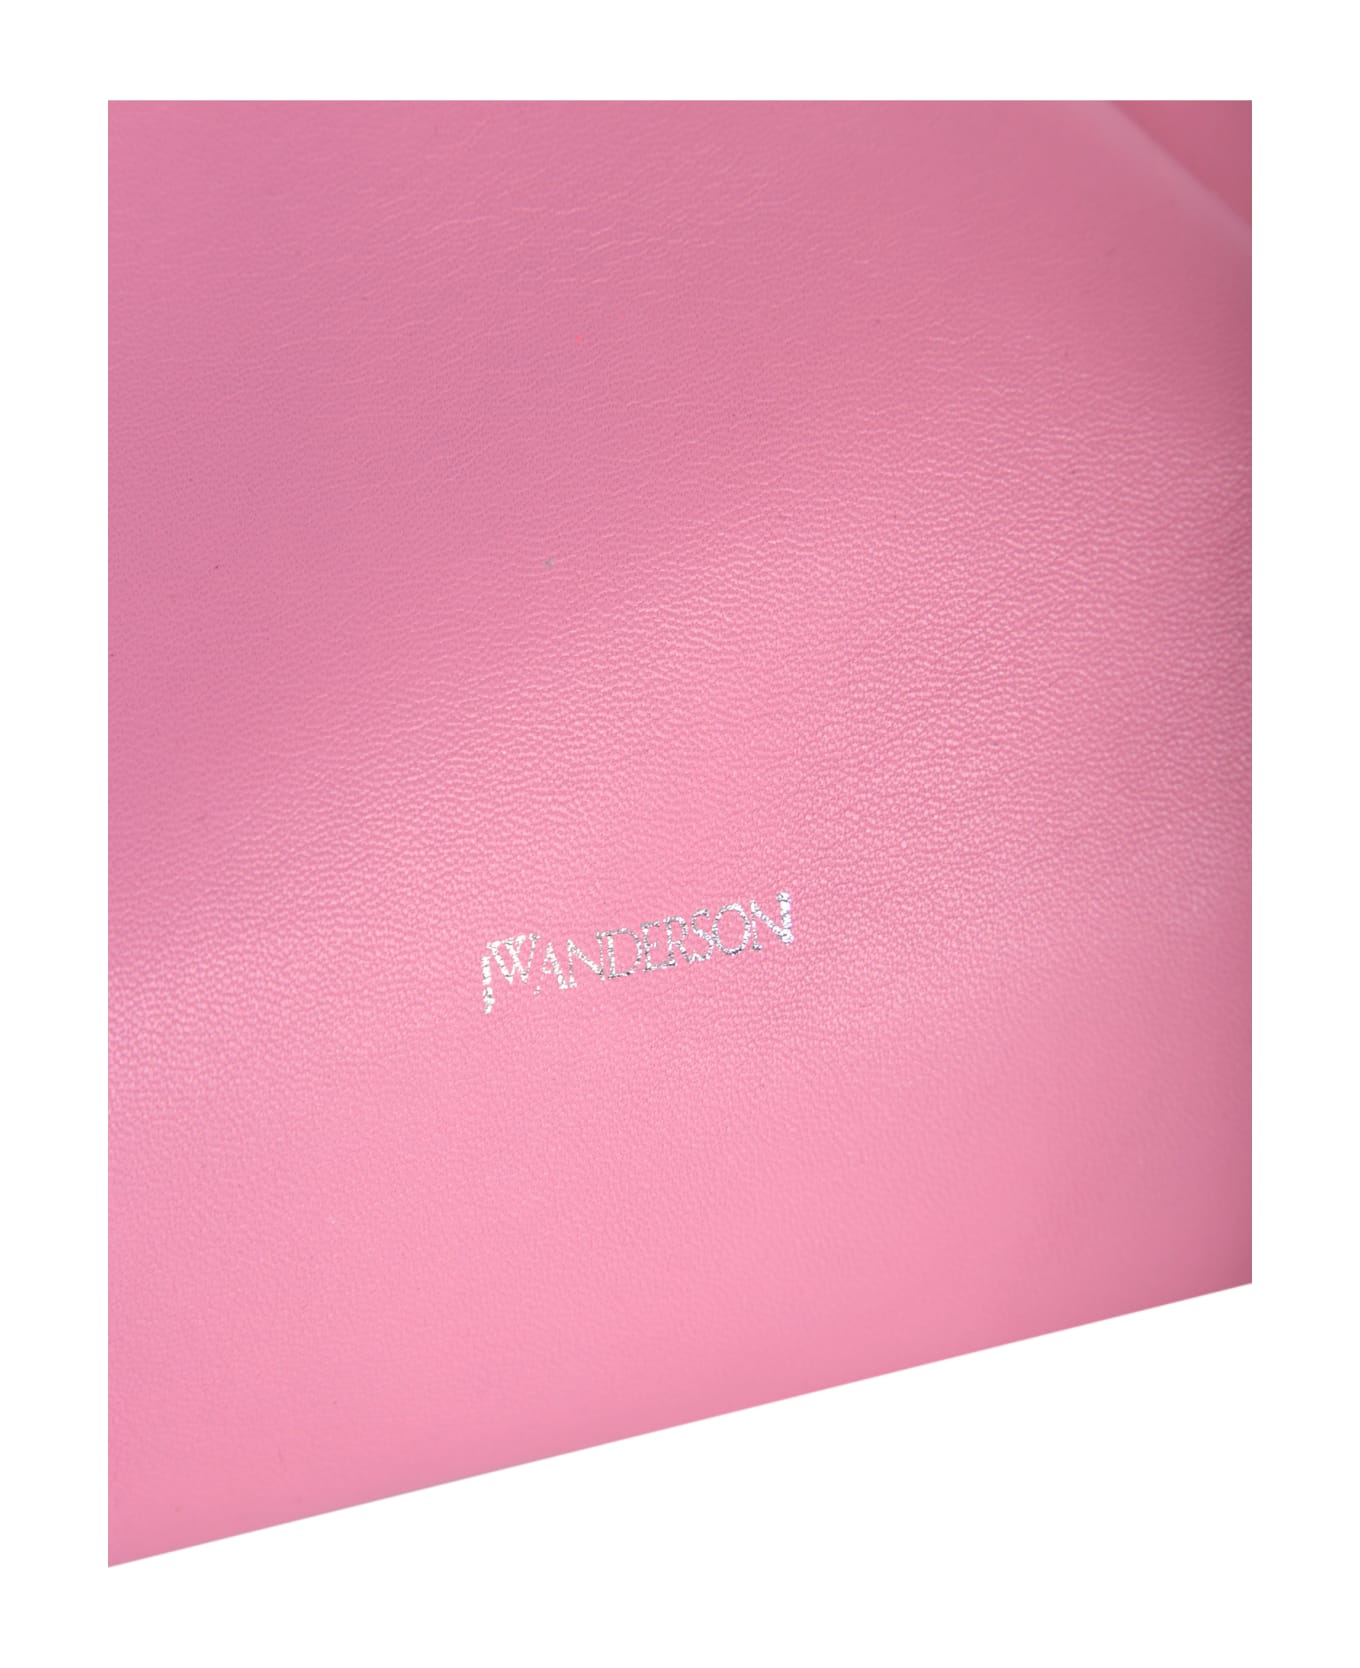 J.W. Anderson Pink Leather The Bumper Clutch - PINK クラッチバッグ